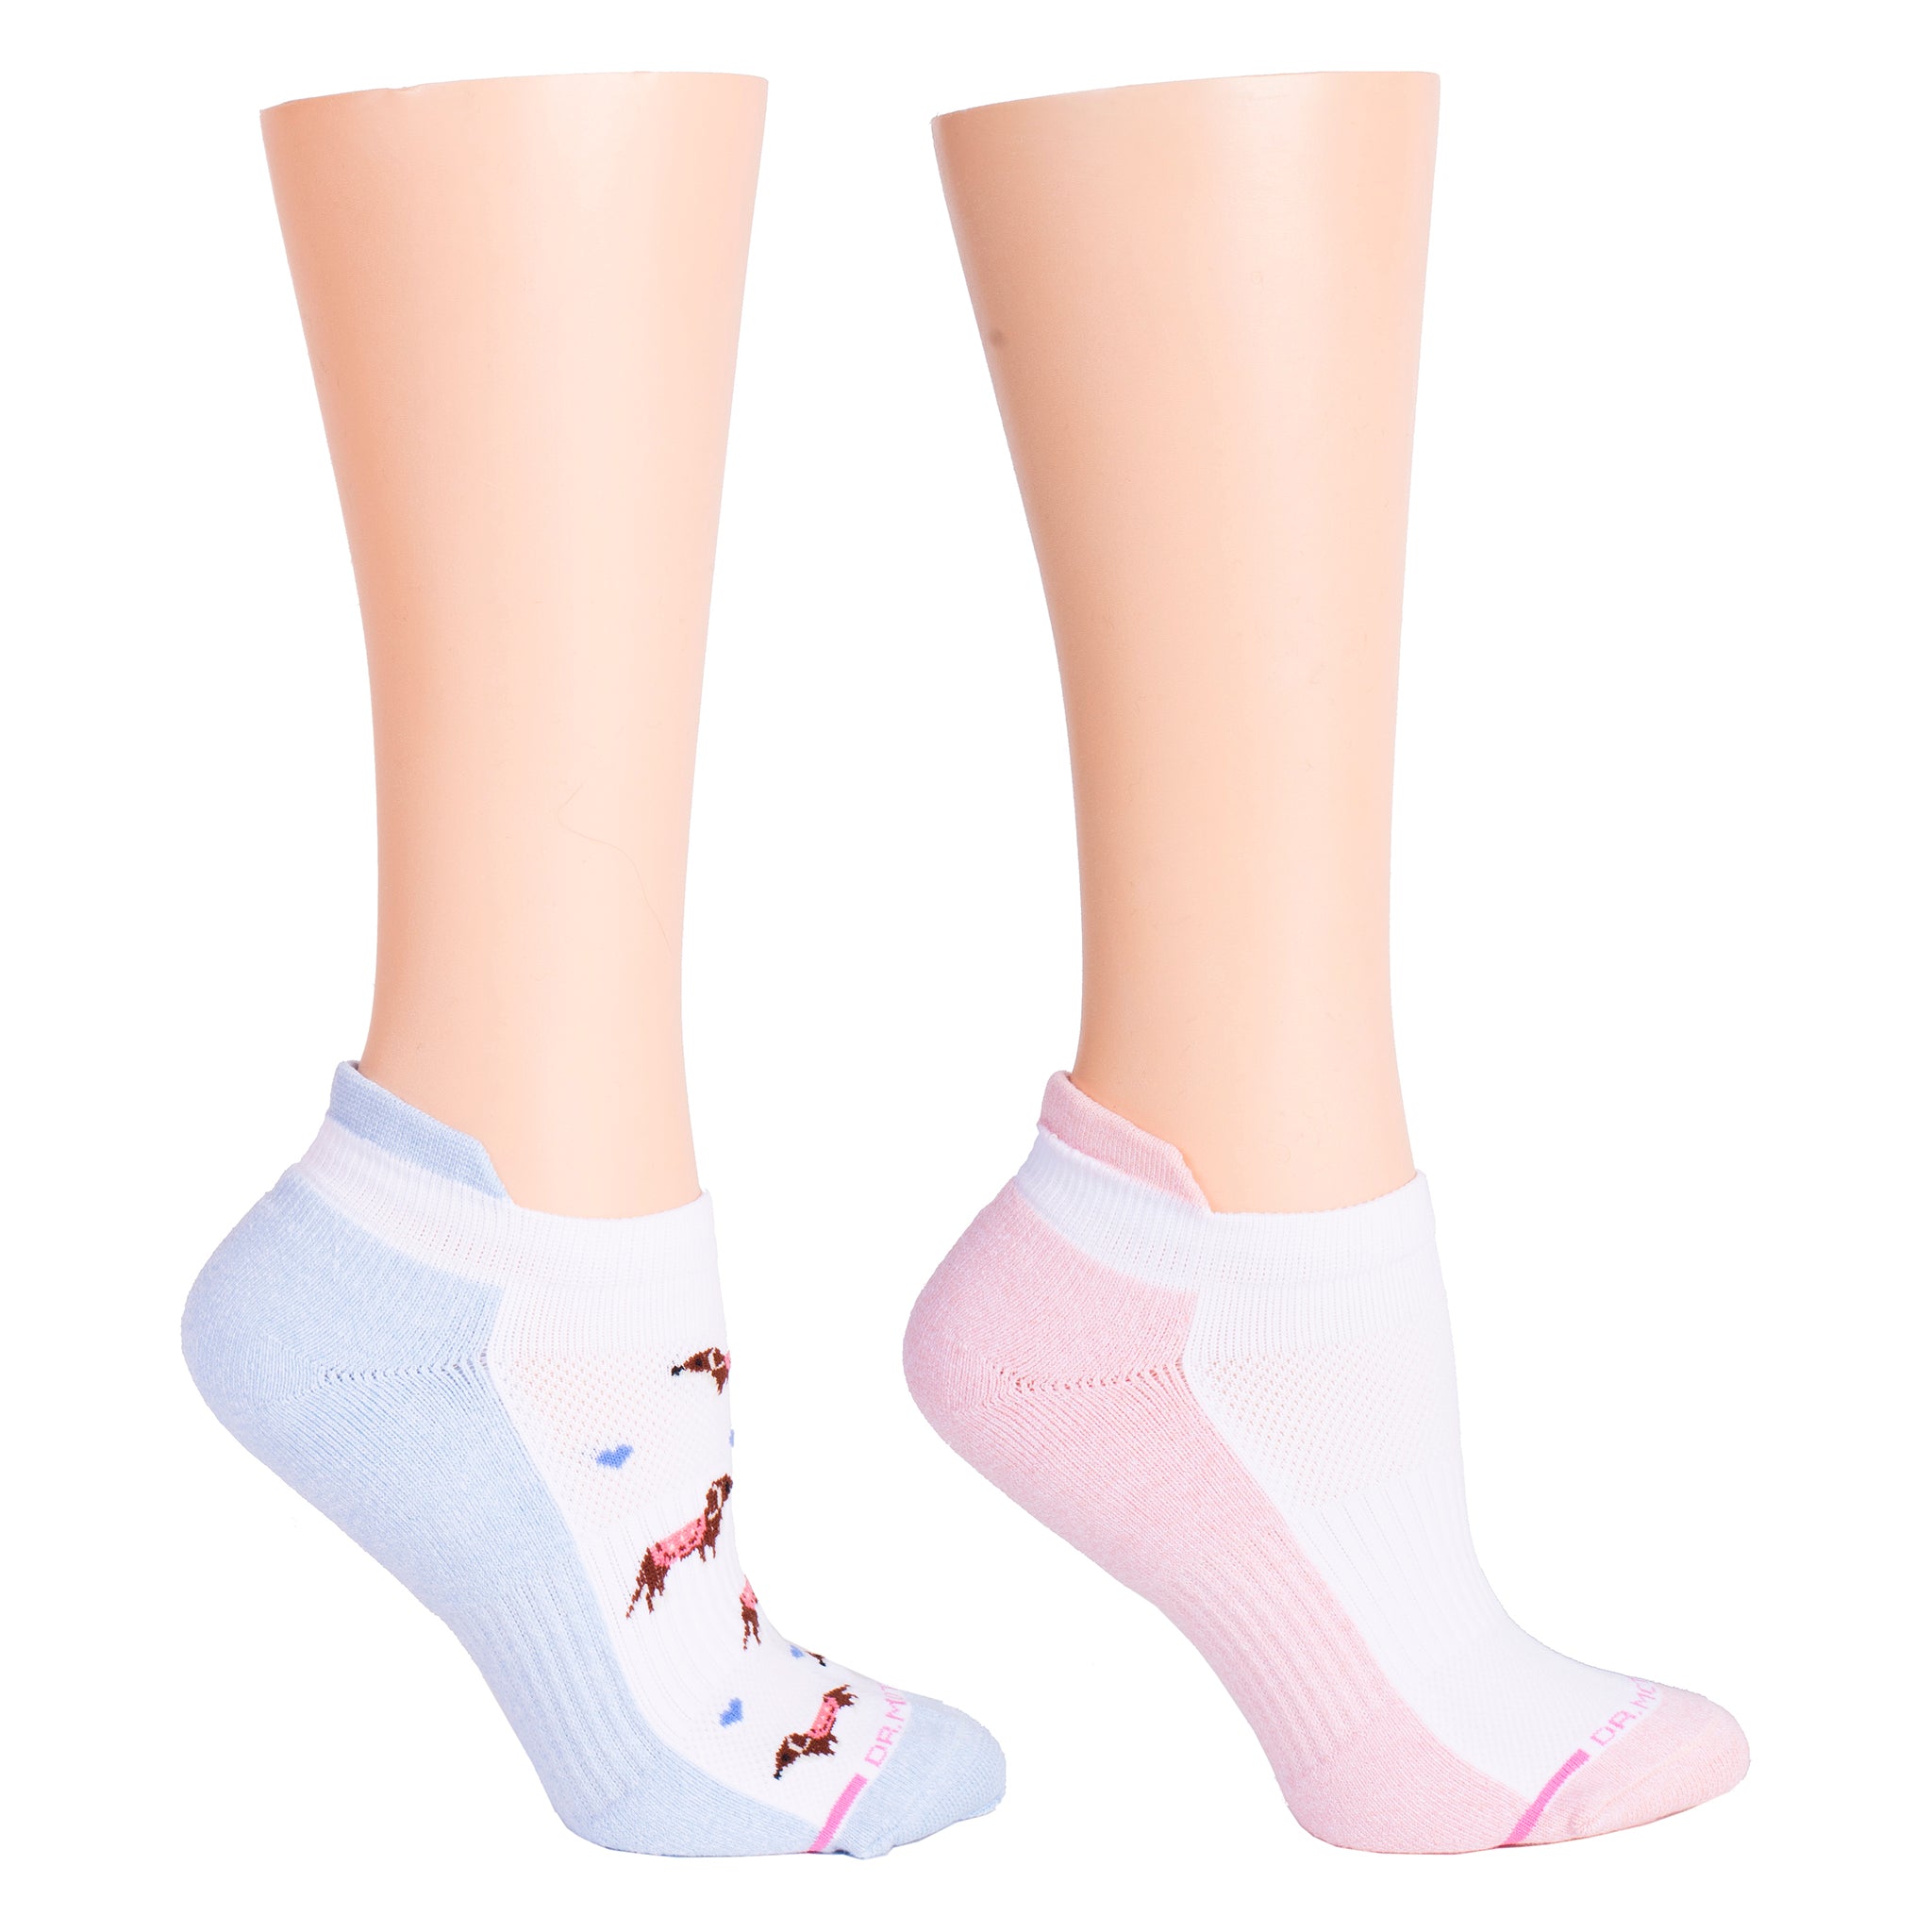 Ankle Compression Socks For Women | Dr. Motion | Dachshund